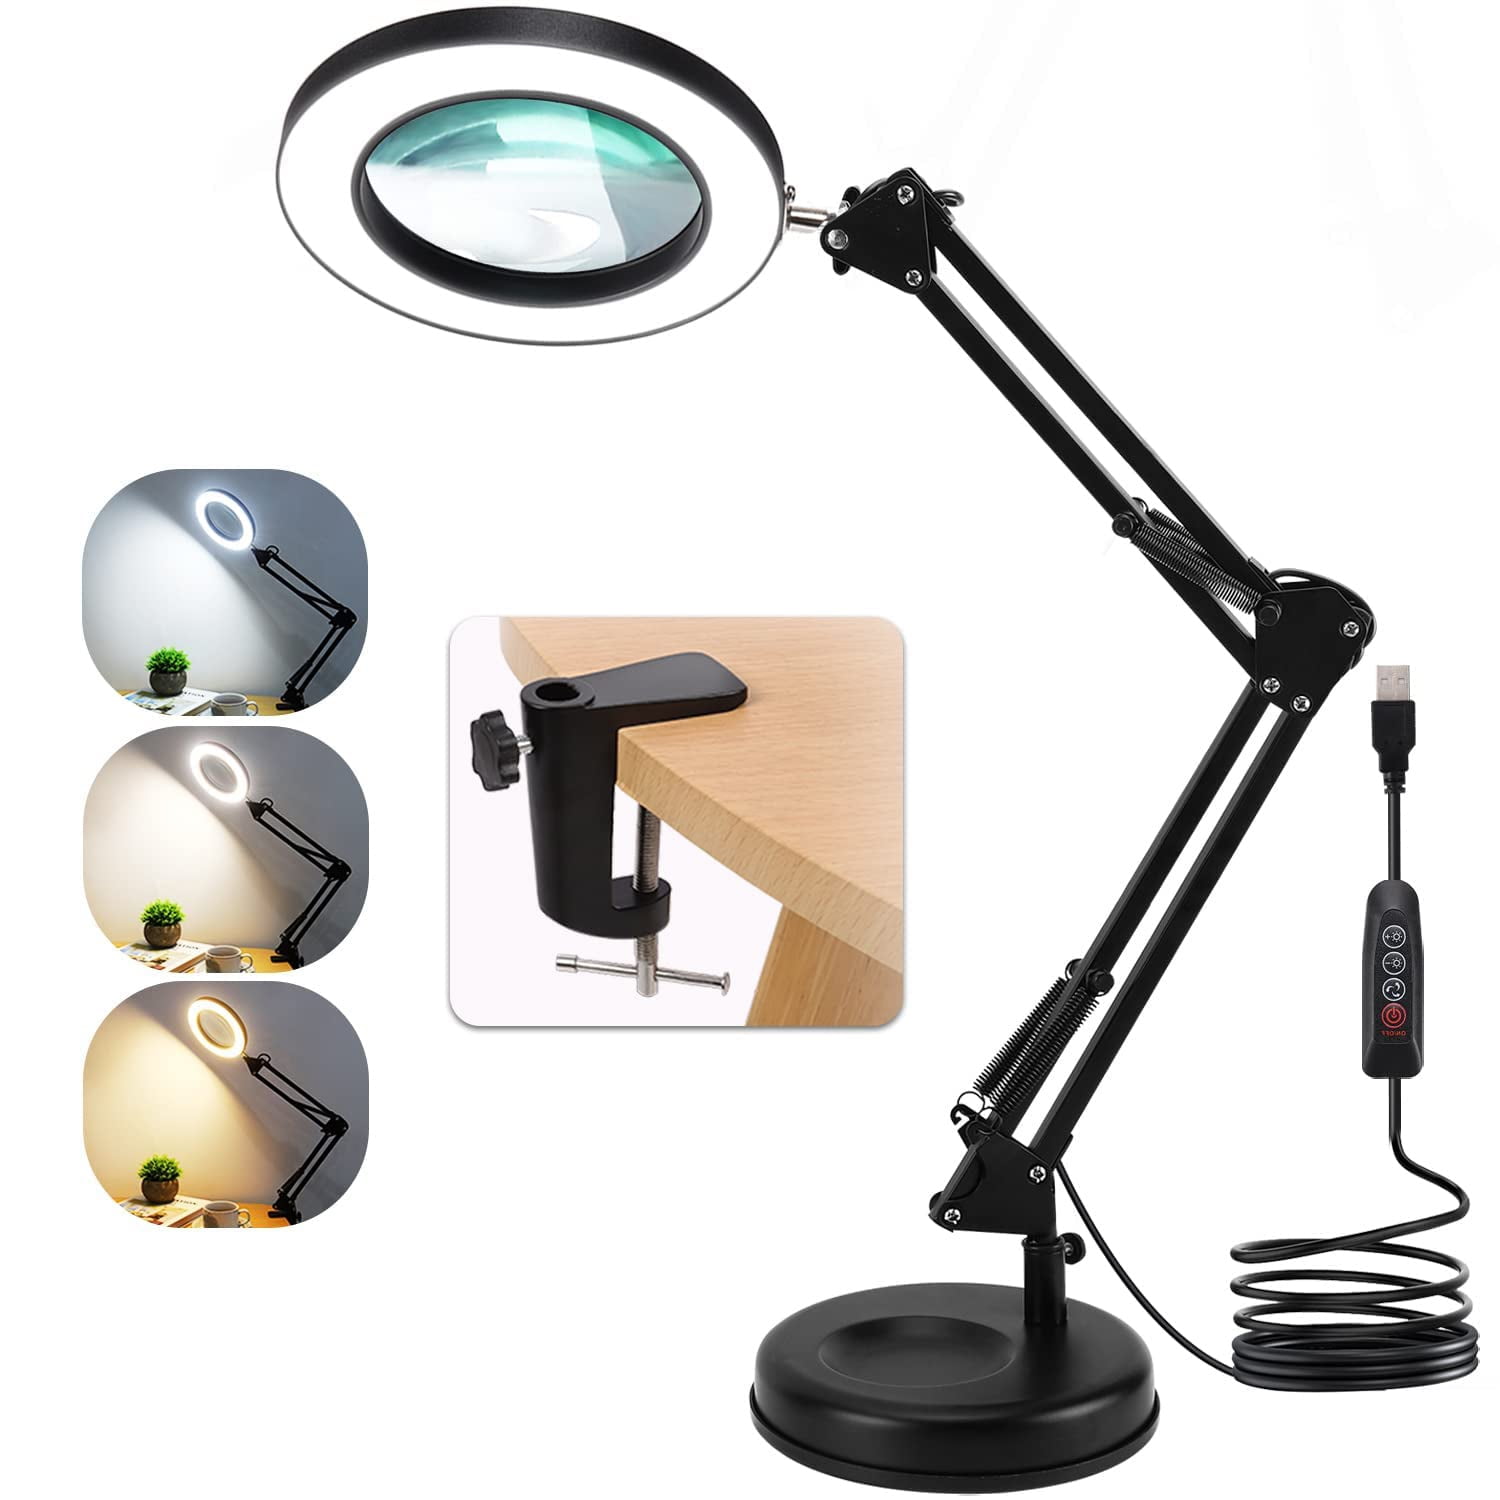  8X Desk Magnifying Glass with Light, NUEYiO 2-in-1 Heavy Duty  Base&Clamp Magnifying lamp, 4.1'' Real Glass Len, 3 Color Stepless Dimmable  LED Lighted Magnifier Glass for Soldering Crafts Sewing : Health